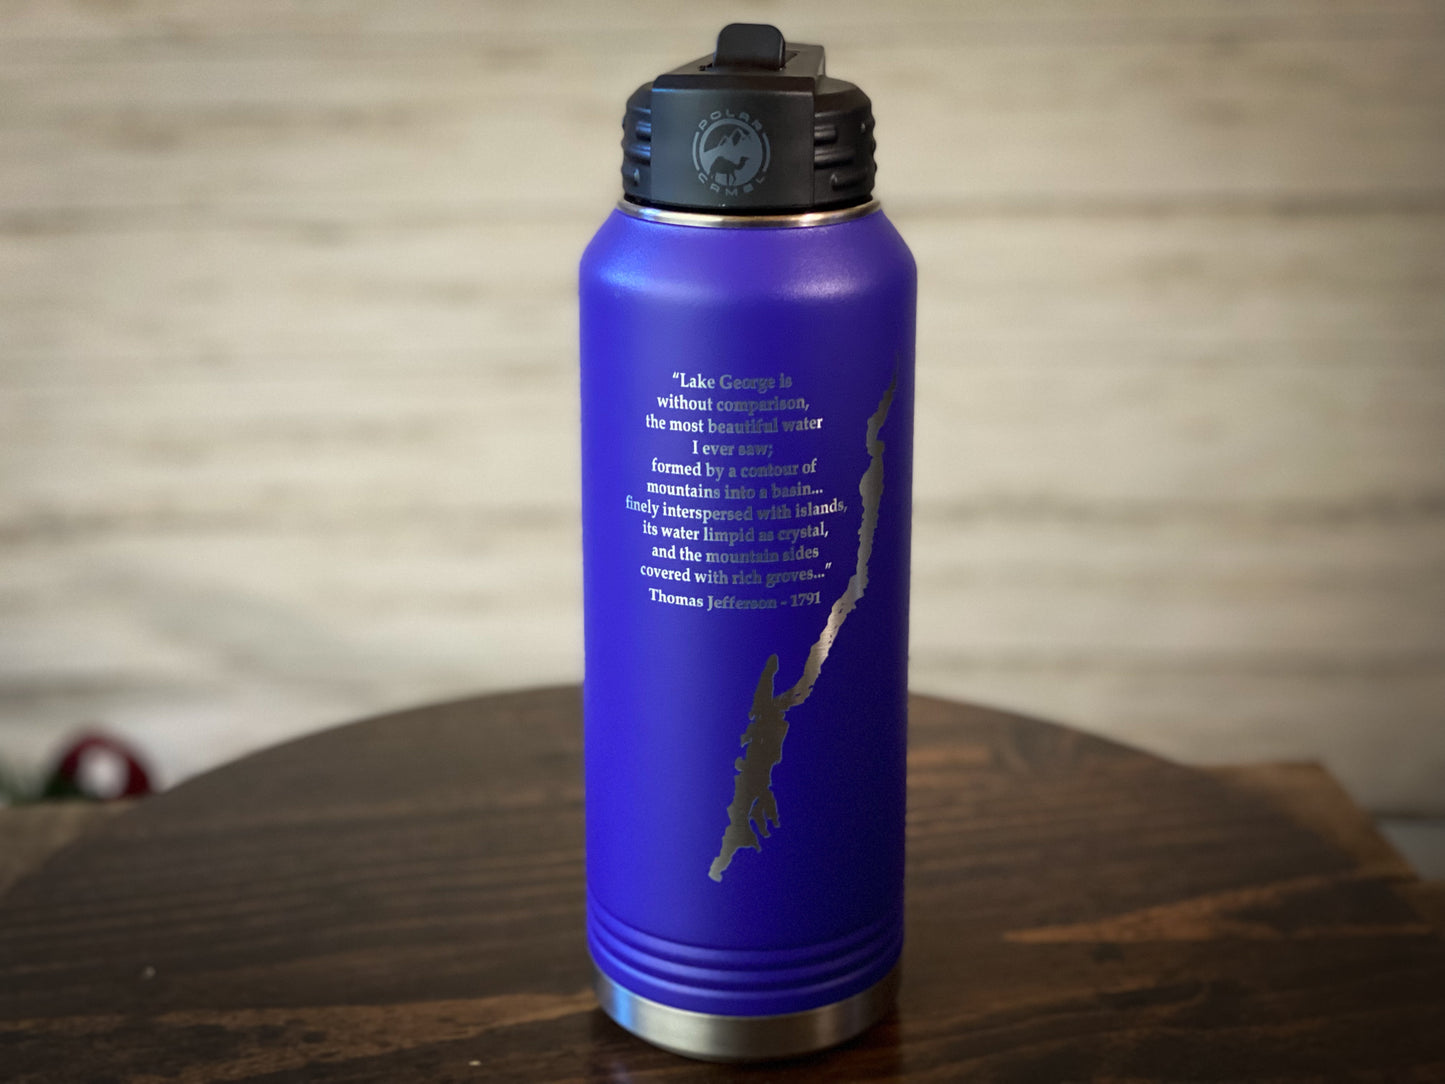 Lake George with Thomas Jefferson Quote   32 oz Insulated Water Bottle